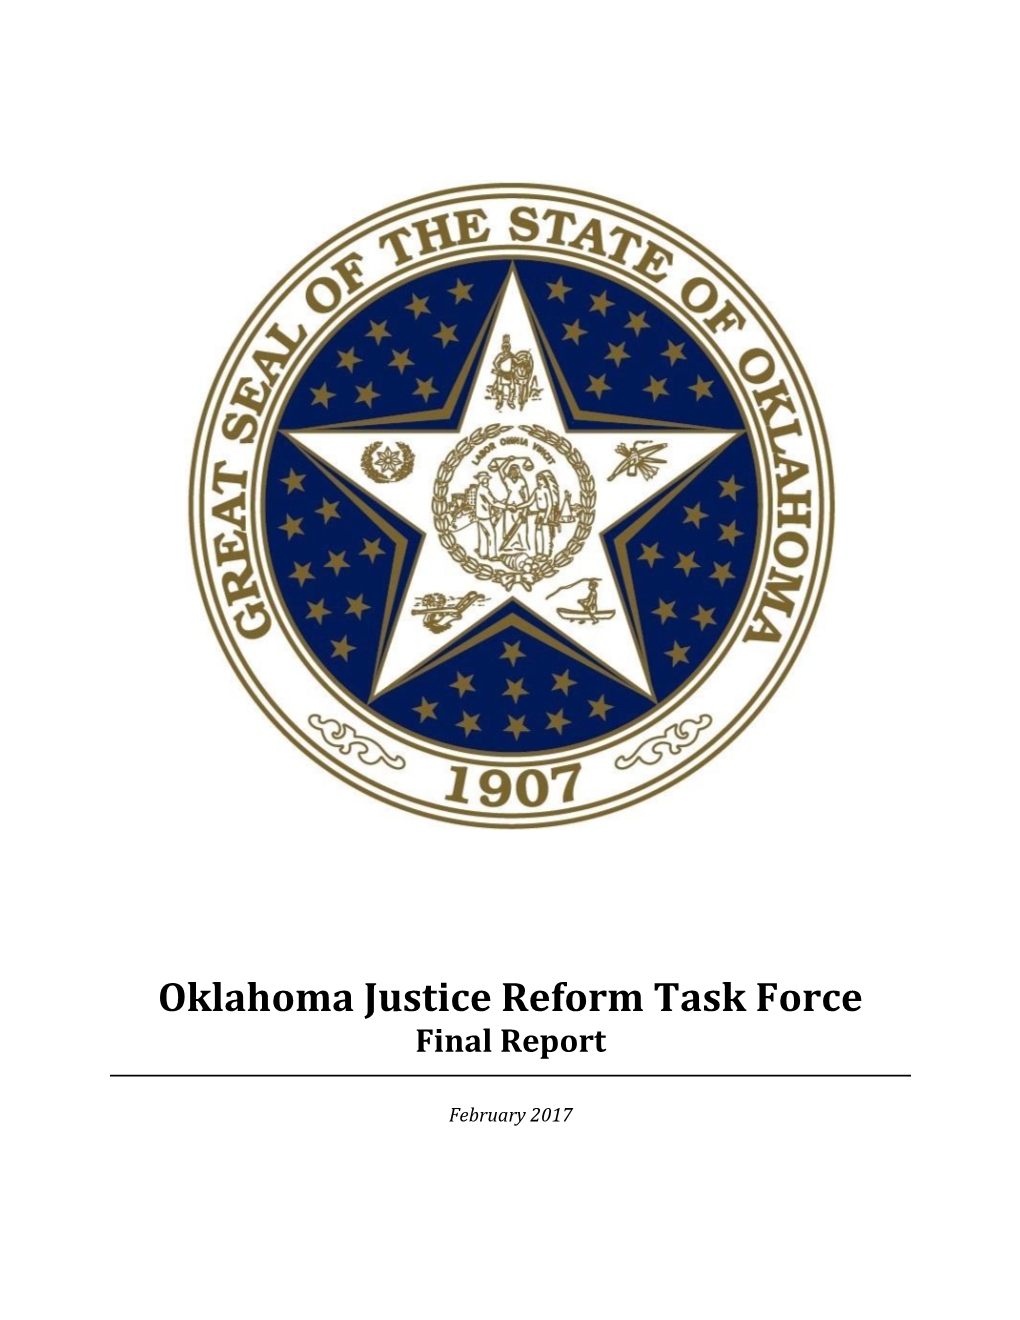 Oklahoma Justice Reform Task Force Final Report